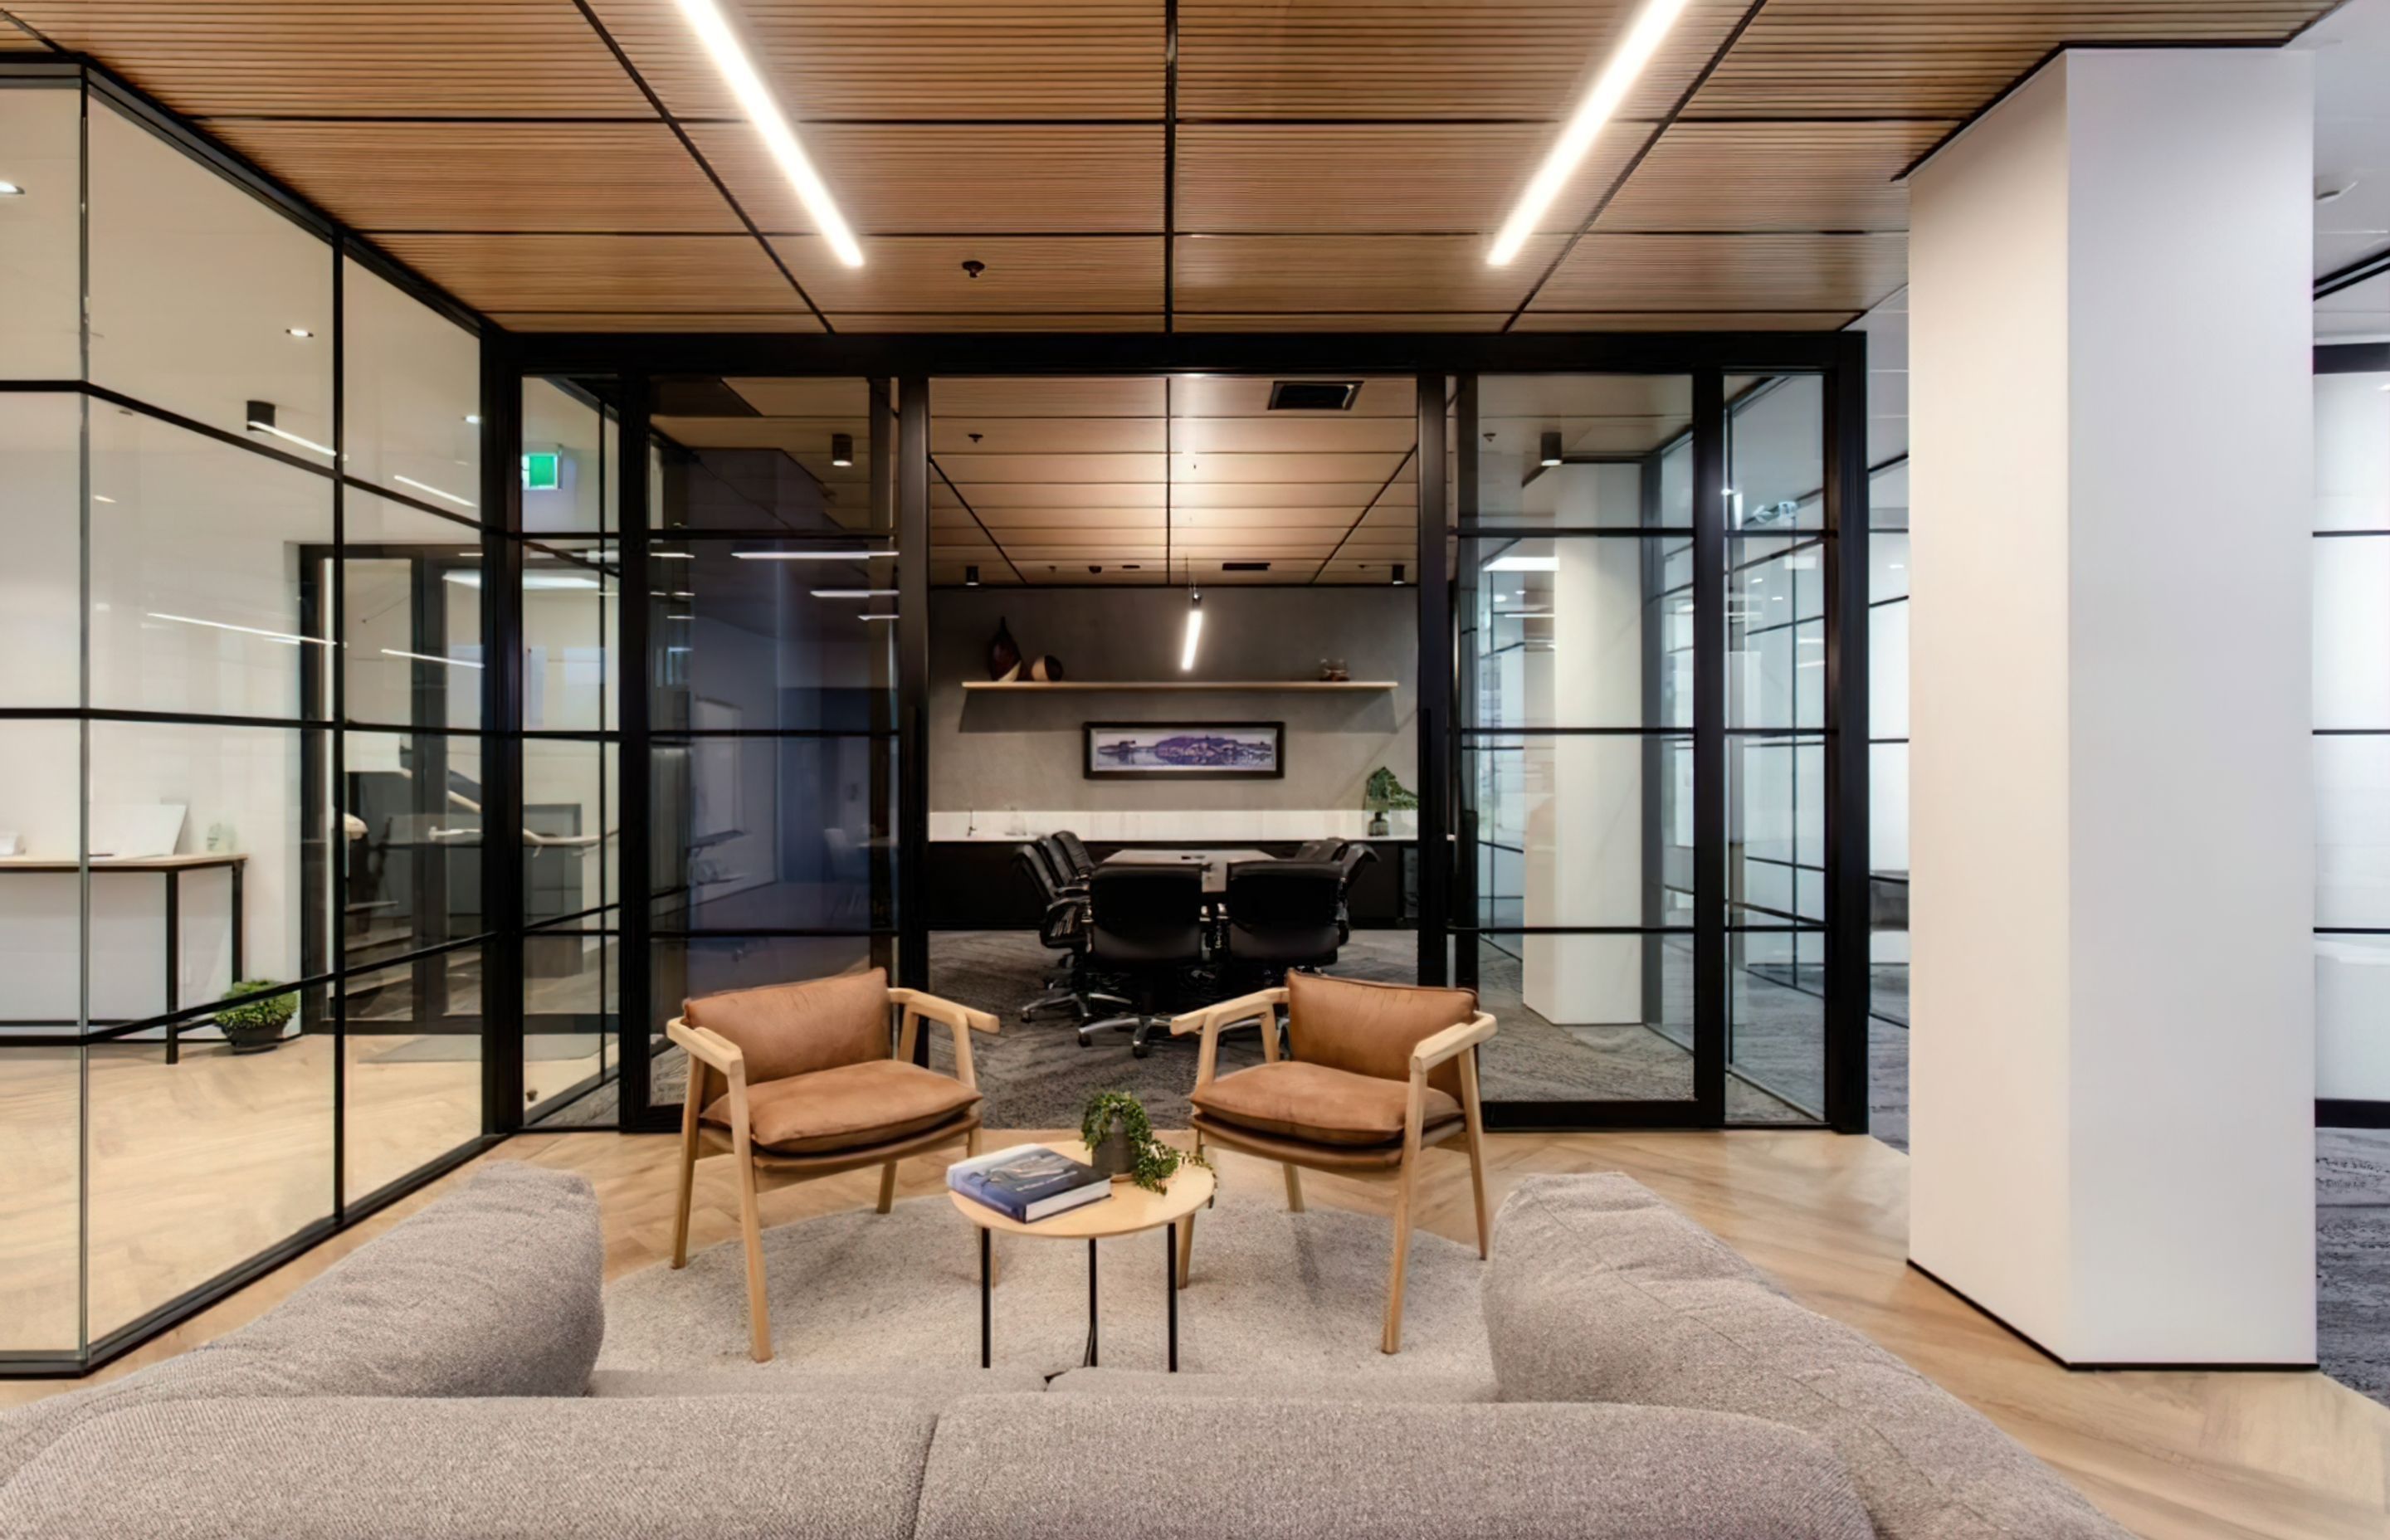 Hoppers Developments wanted a relaxed, light-filled office space designed with employee input to create a welcoming sense of collaboration.